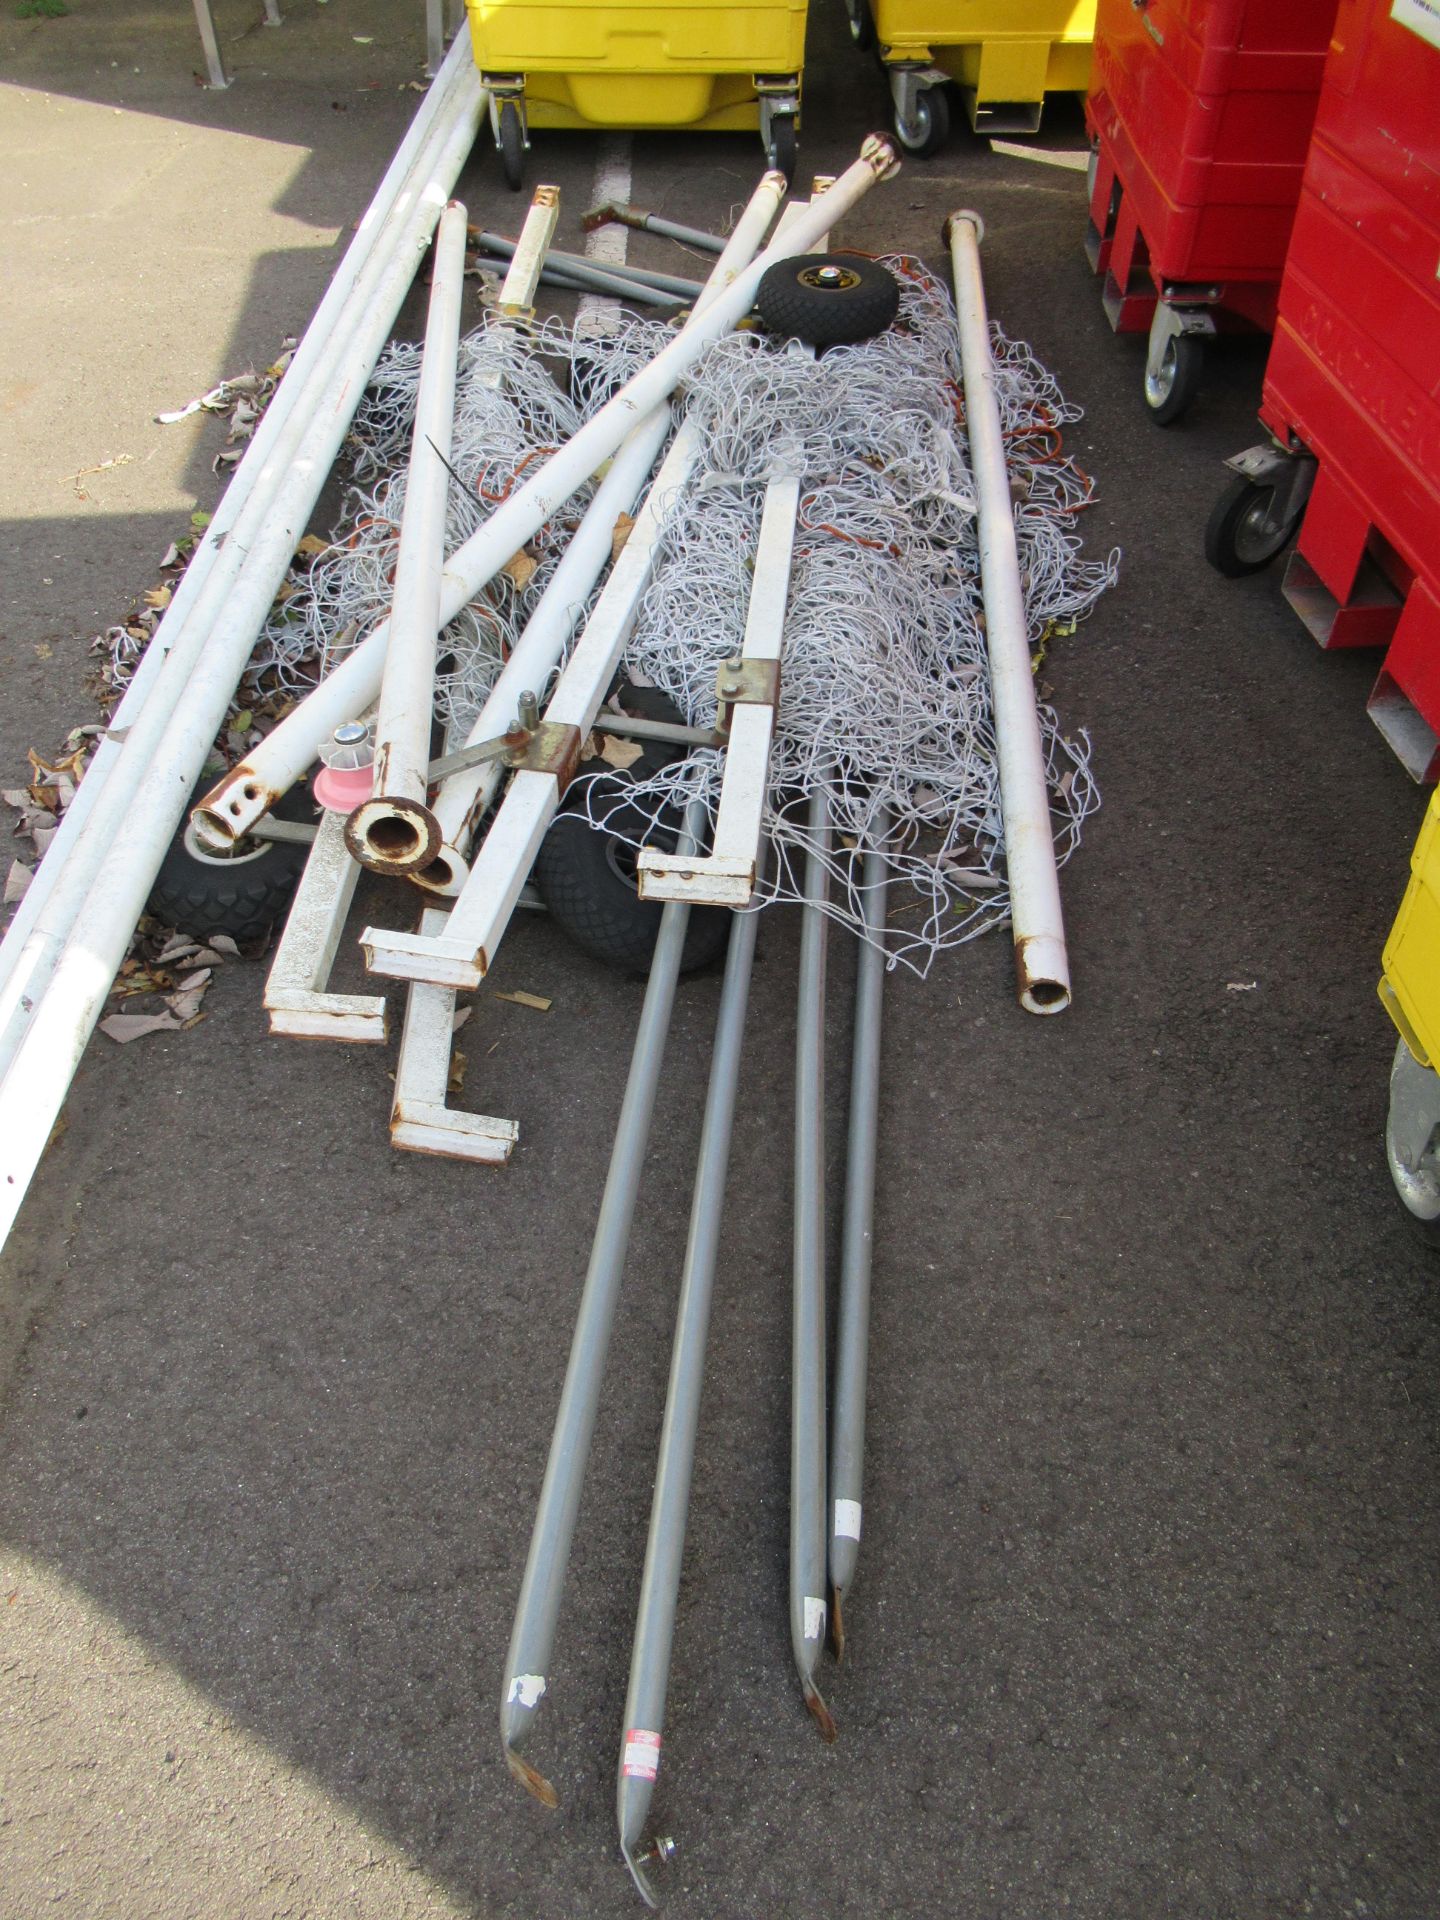 Steel Goal Posts with Net - Image 2 of 2